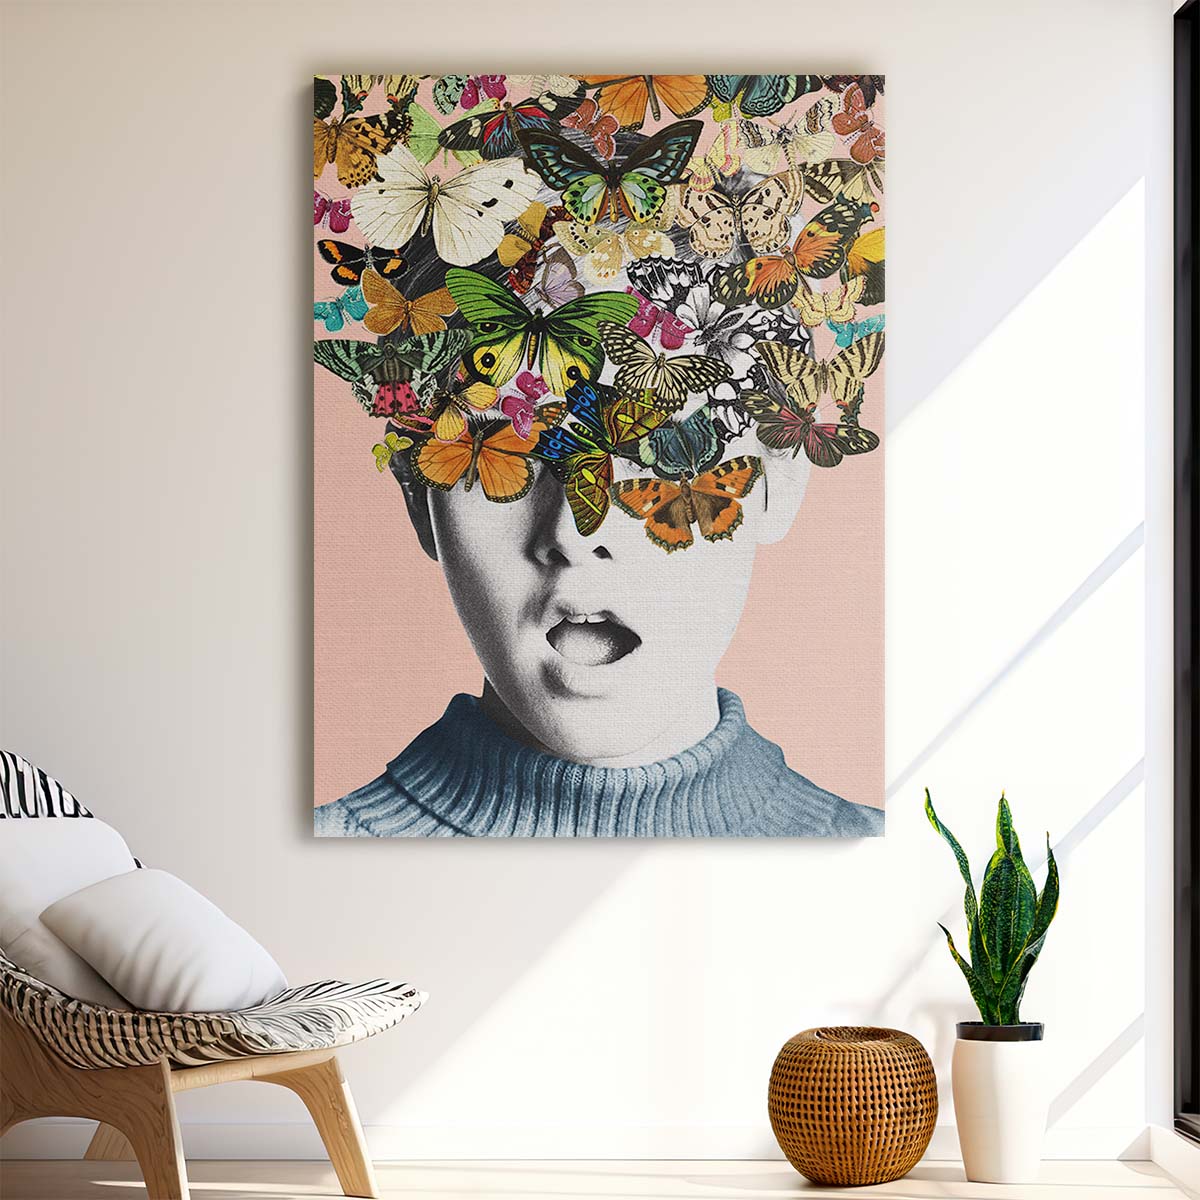 Colorful Surrealistic Butterfly Woman Portrait Photography Wall Art by Luxuriance Designs, made in USA